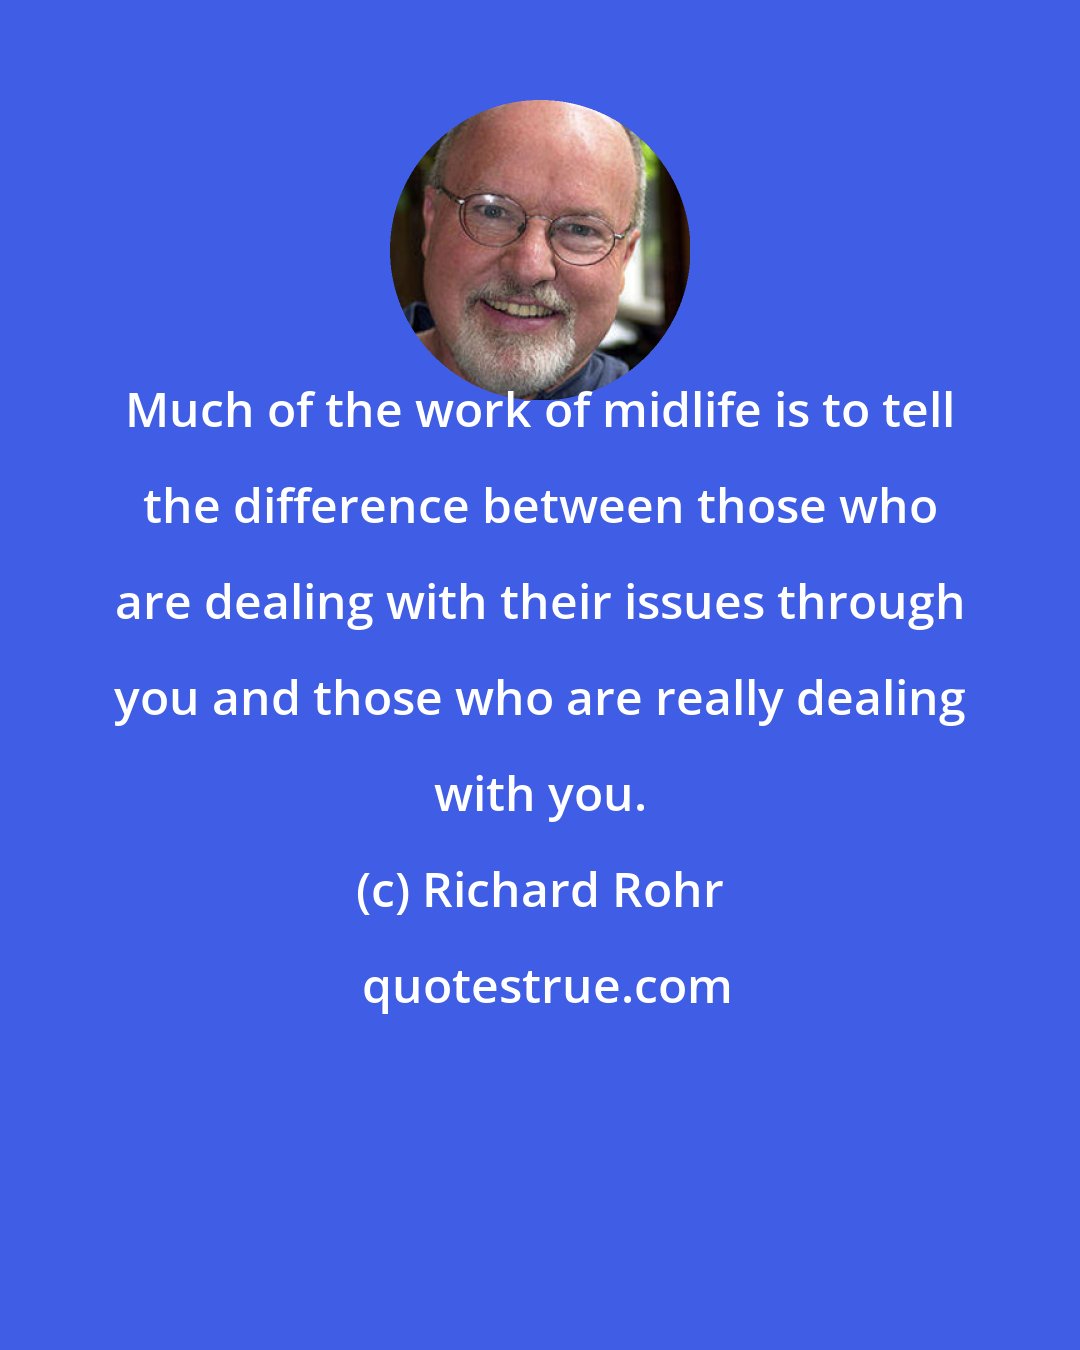 Richard Rohr: Much of the work of midlife is to tell the difference between those who are dealing with their issues through you and those who are really dealing with you.